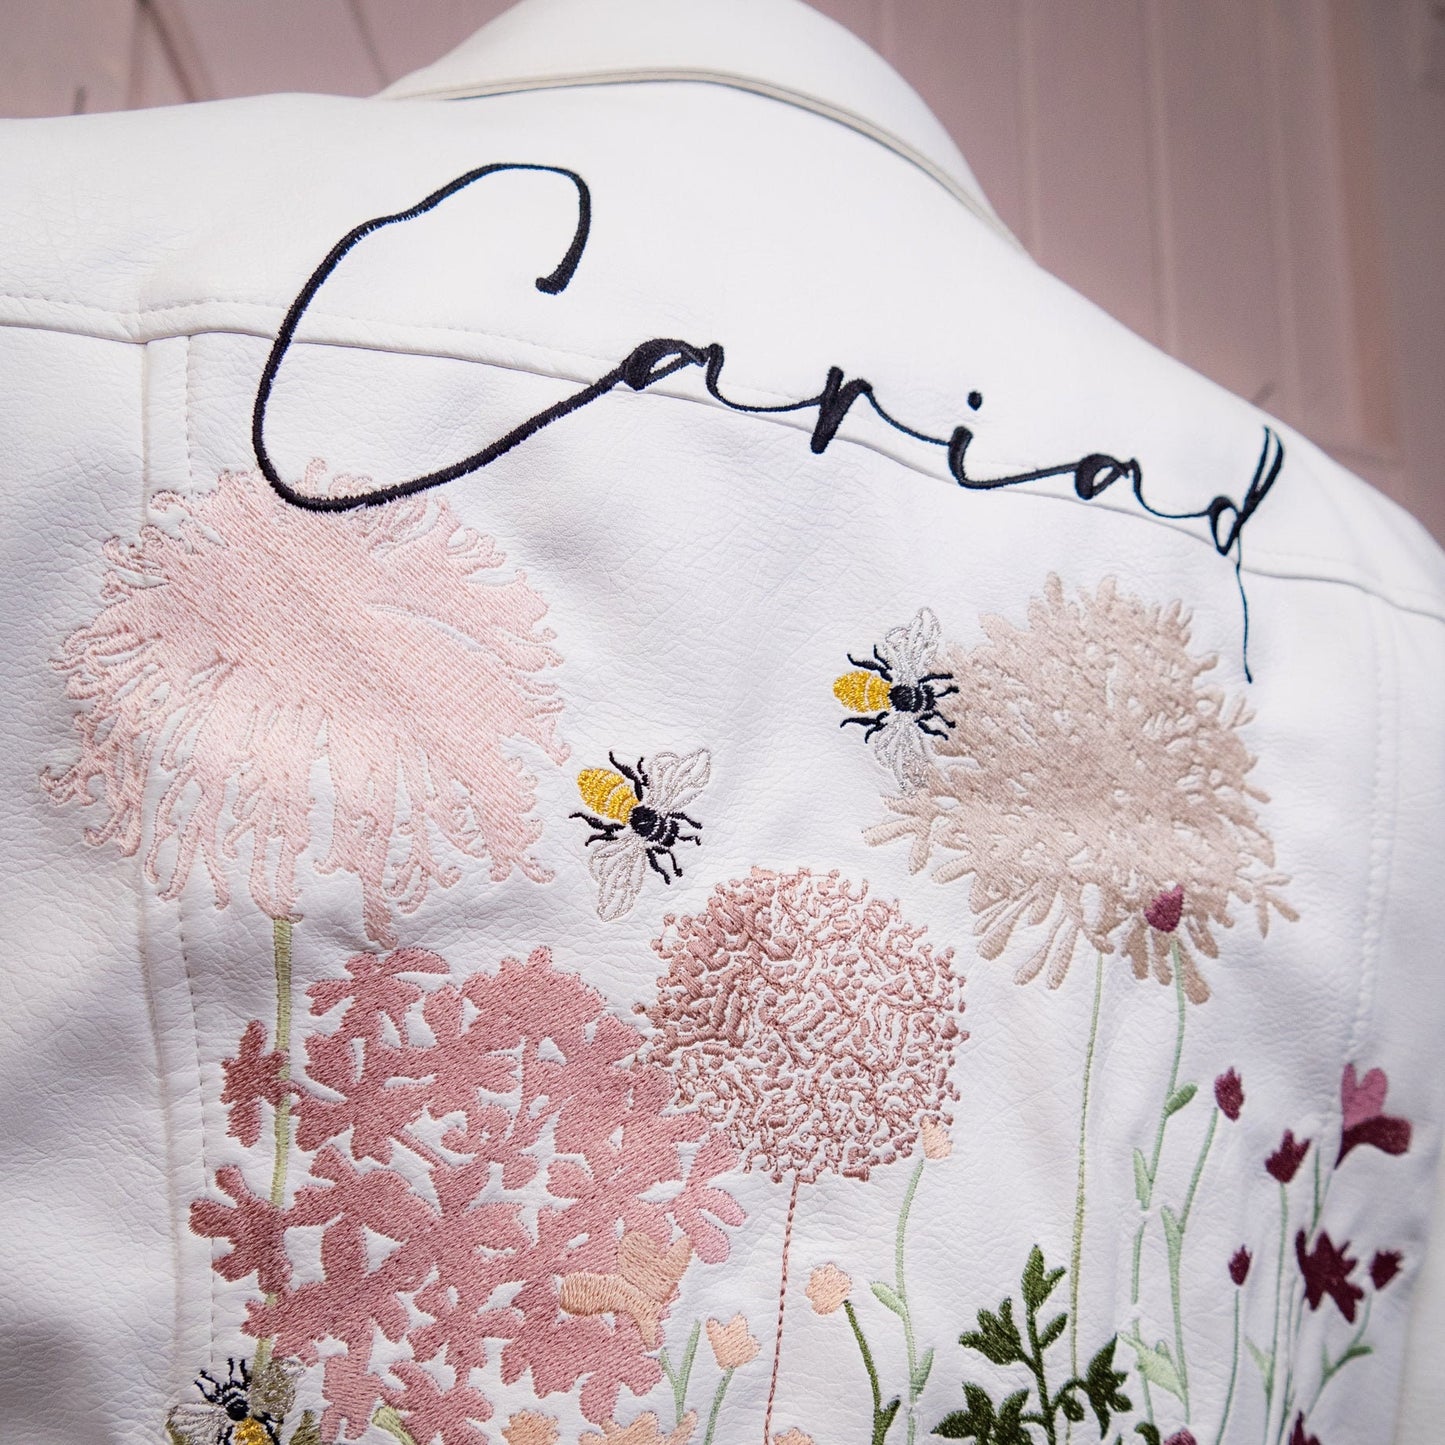 Wildflowers in Ecru: Enhance your wedding style with this charming embroidered jacket, a perfect blend of boho-chic and bridal sophistication